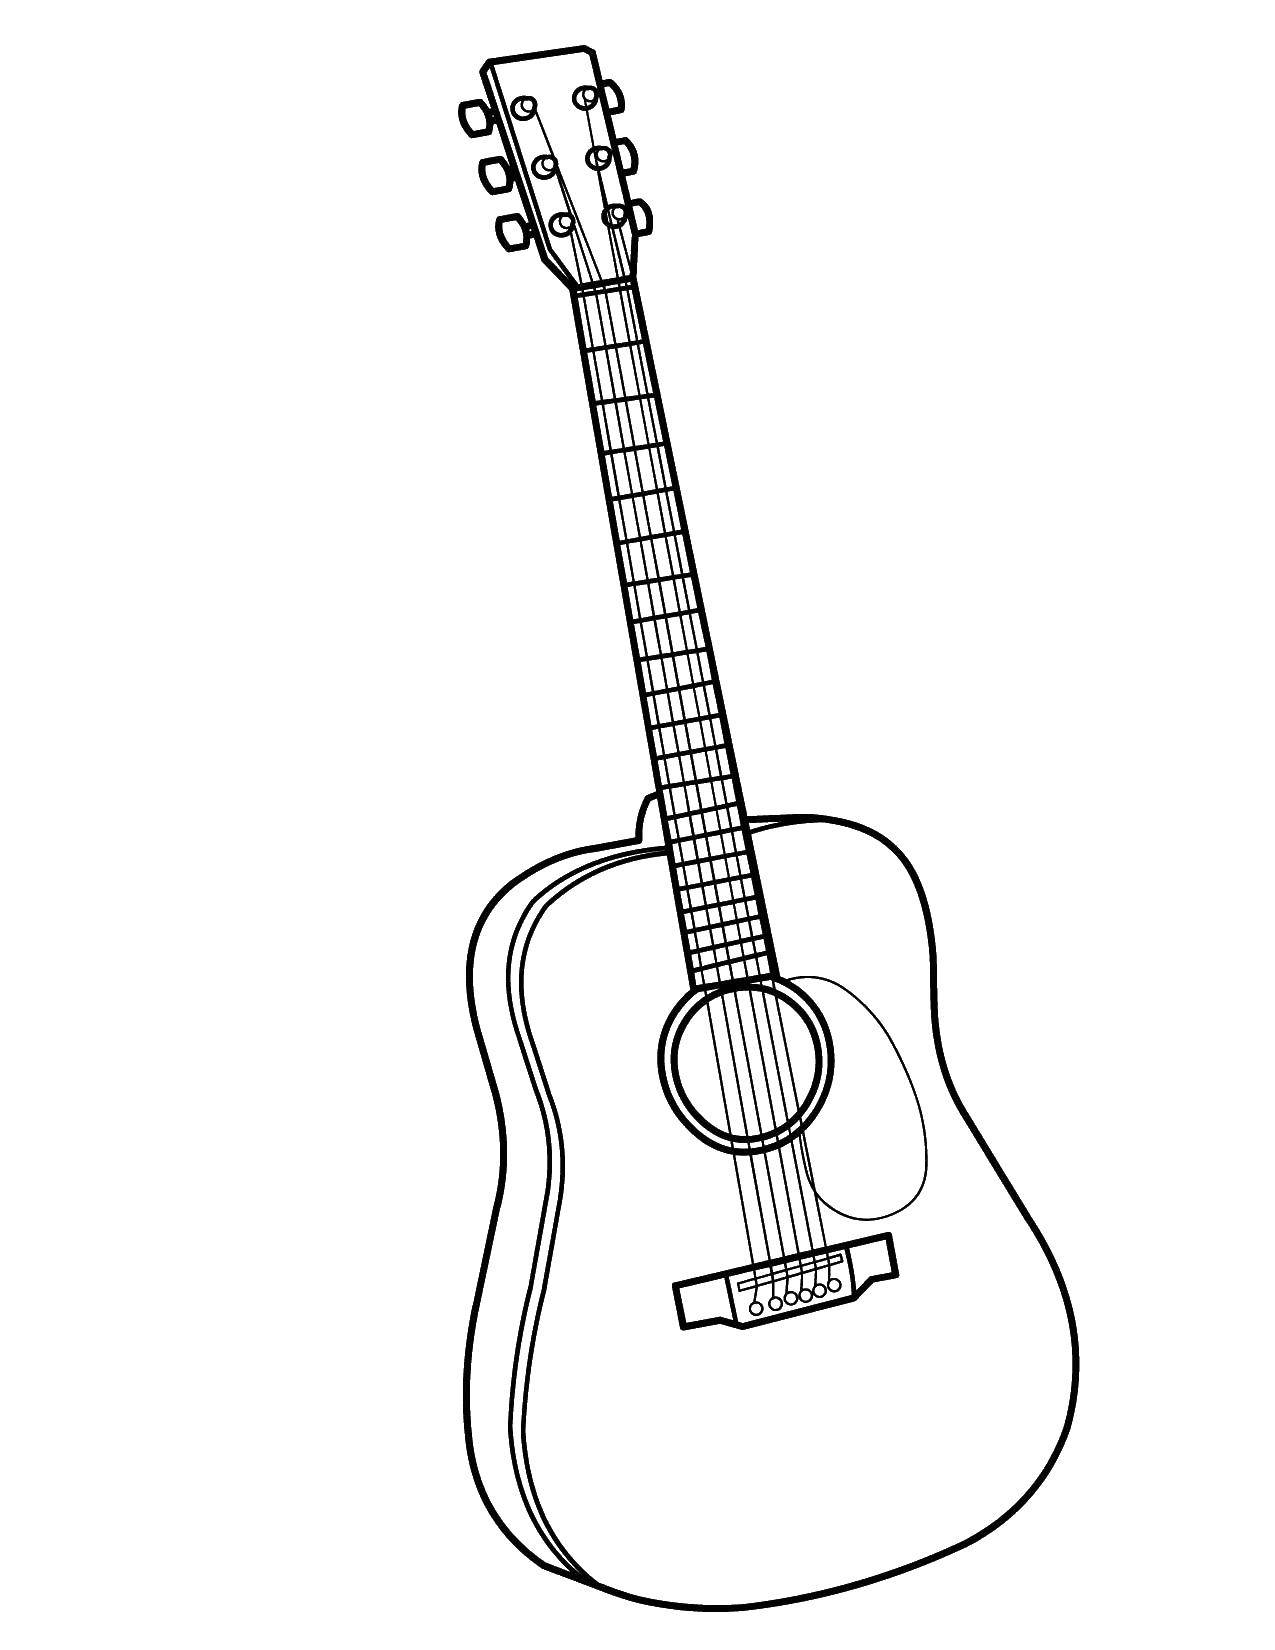 Coloring Guitar. Category Music. Tags:  music, musical instruments, guitar.